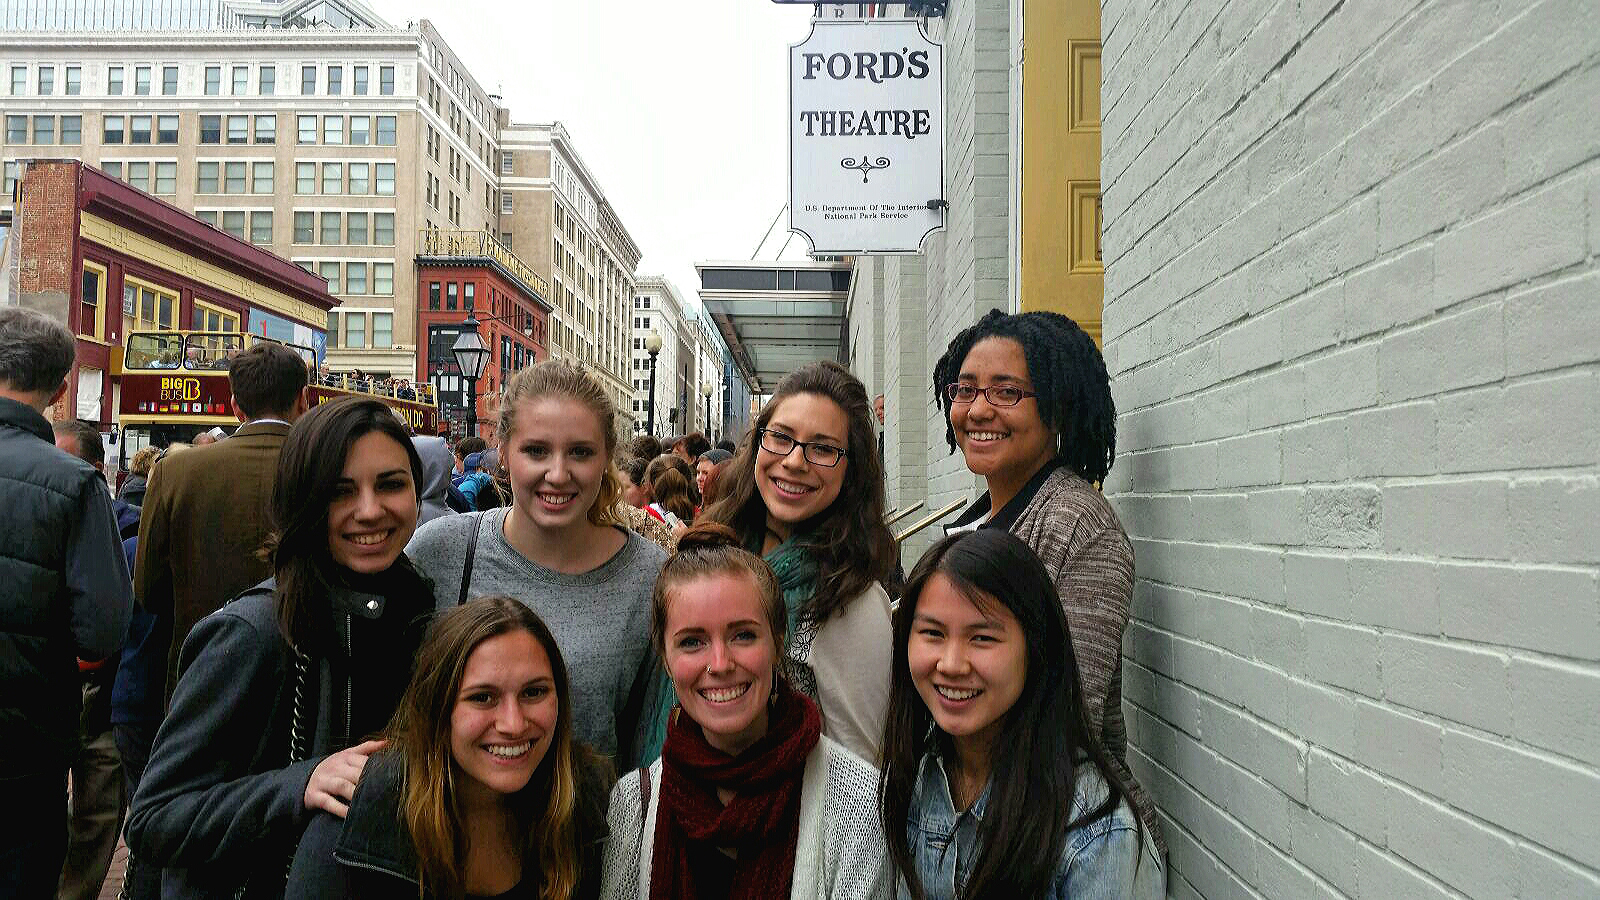 Students in Hamilton's Program in Washington, D.C. at Ford's Theater.